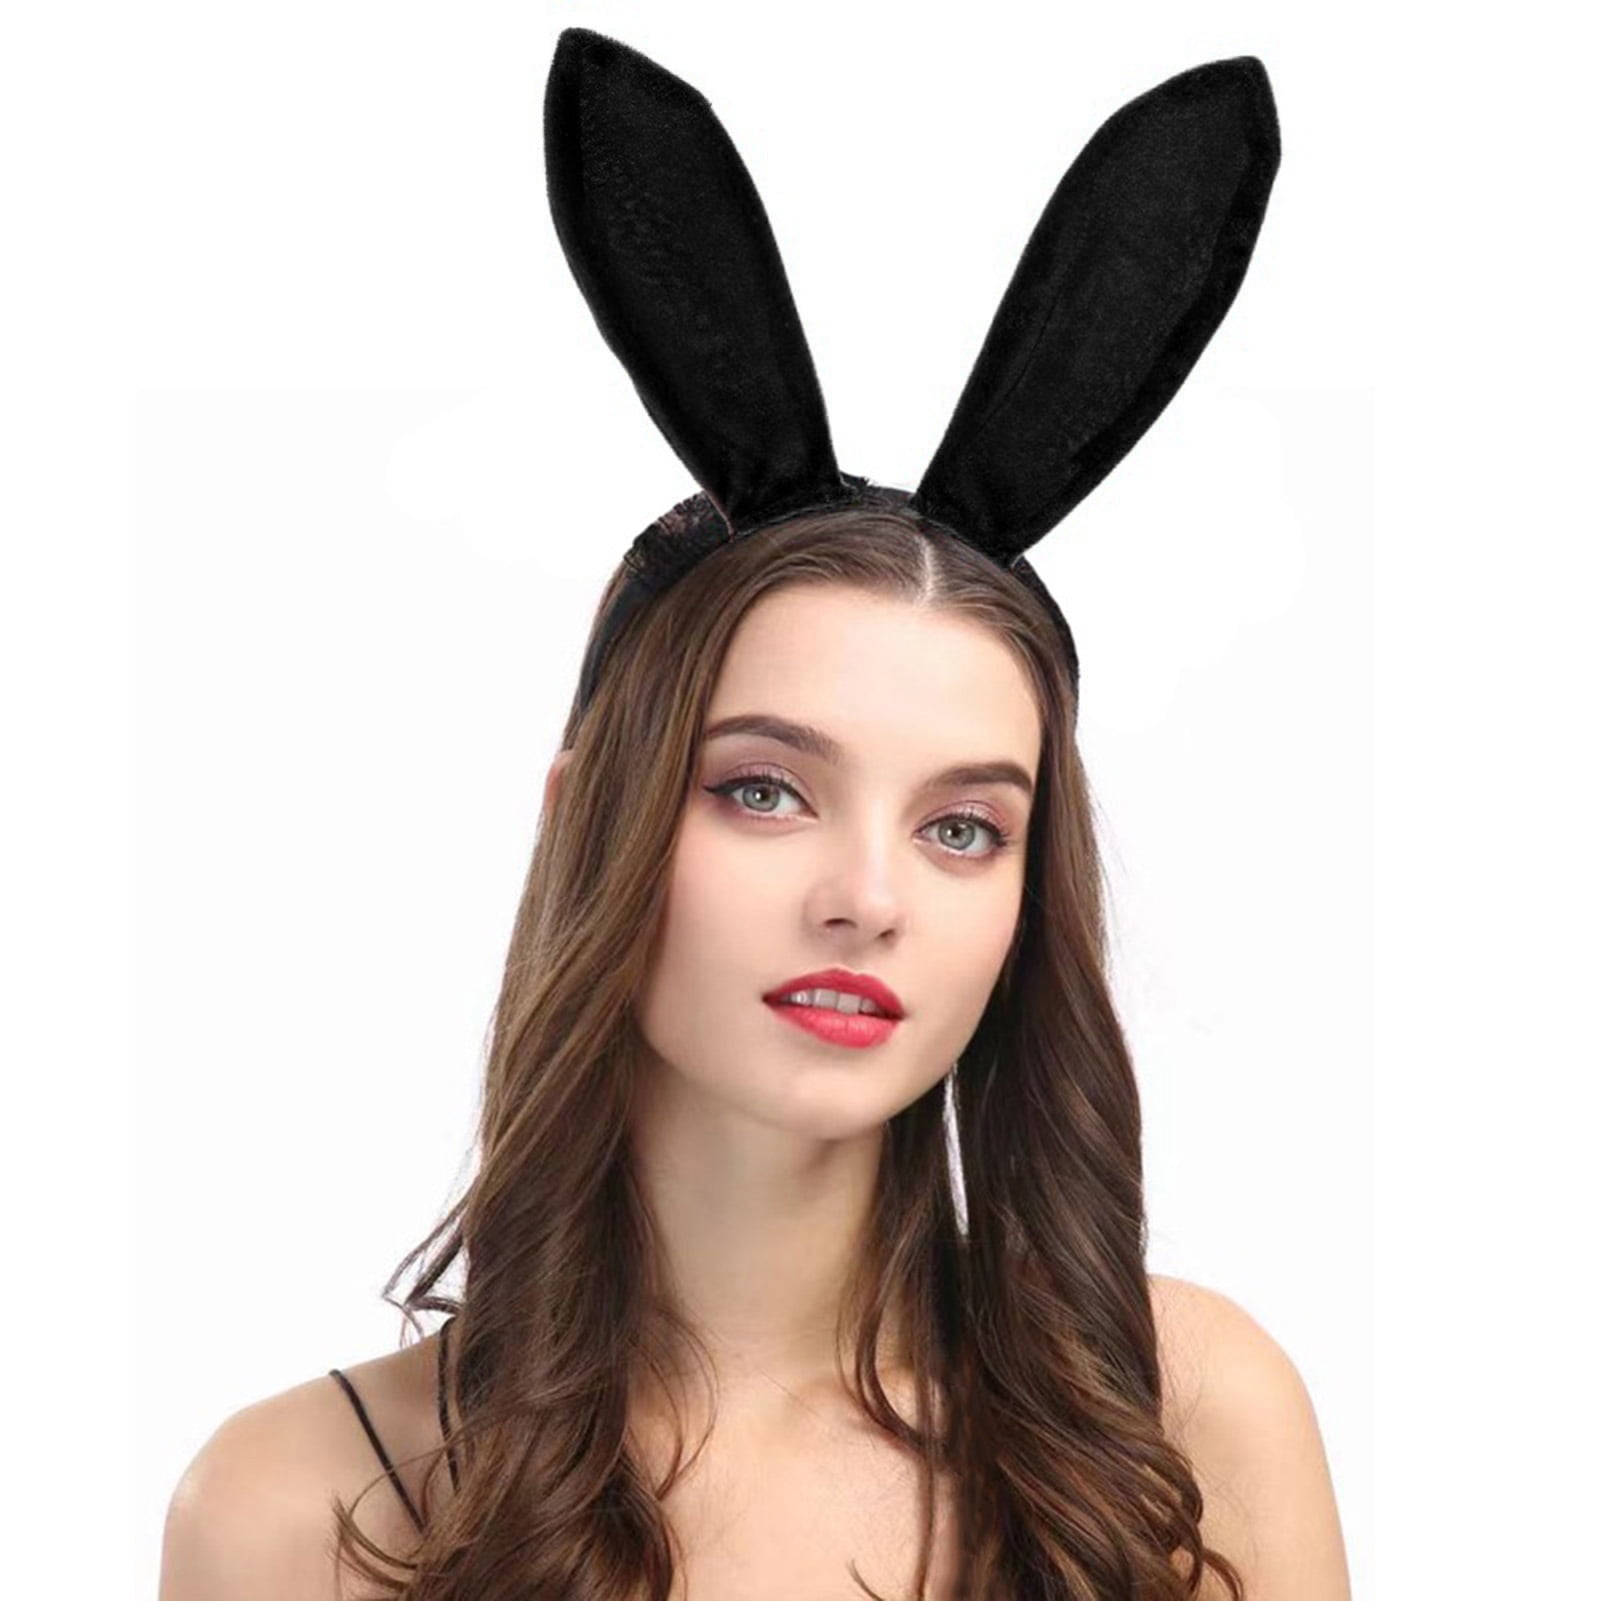 BUNNY EARS HEADBAND FANCY DRESS EASTER PARTY RABBIT OUTFIT COSTUME ACCESSORIES 